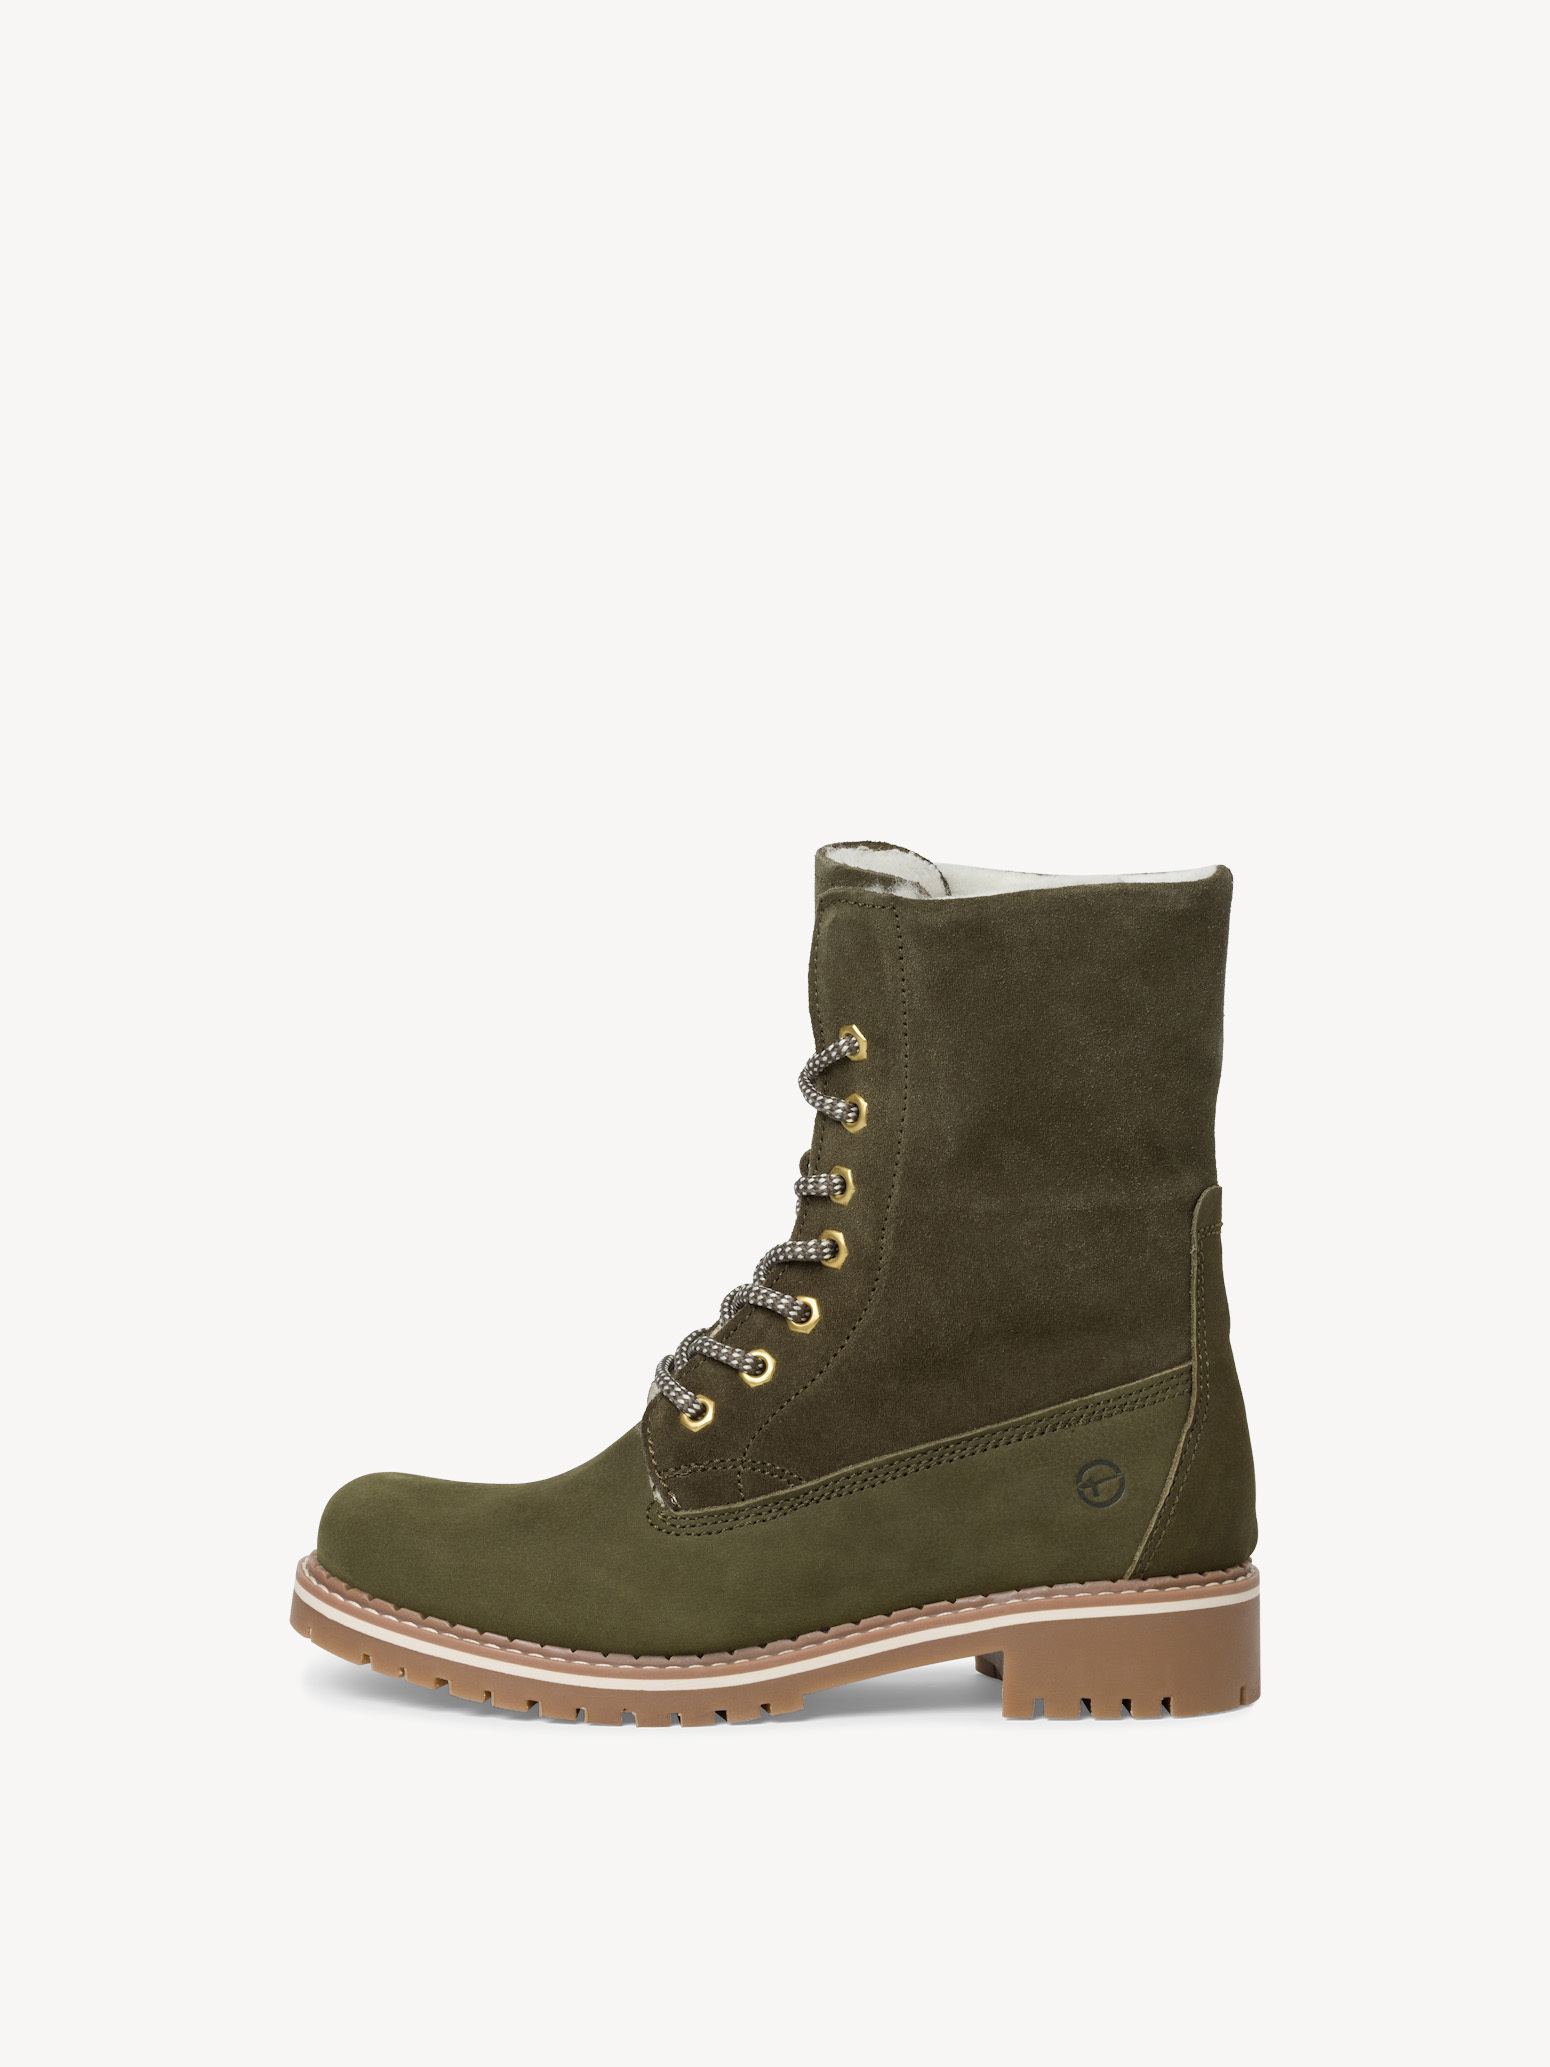 Leather Bootie - green warm lining